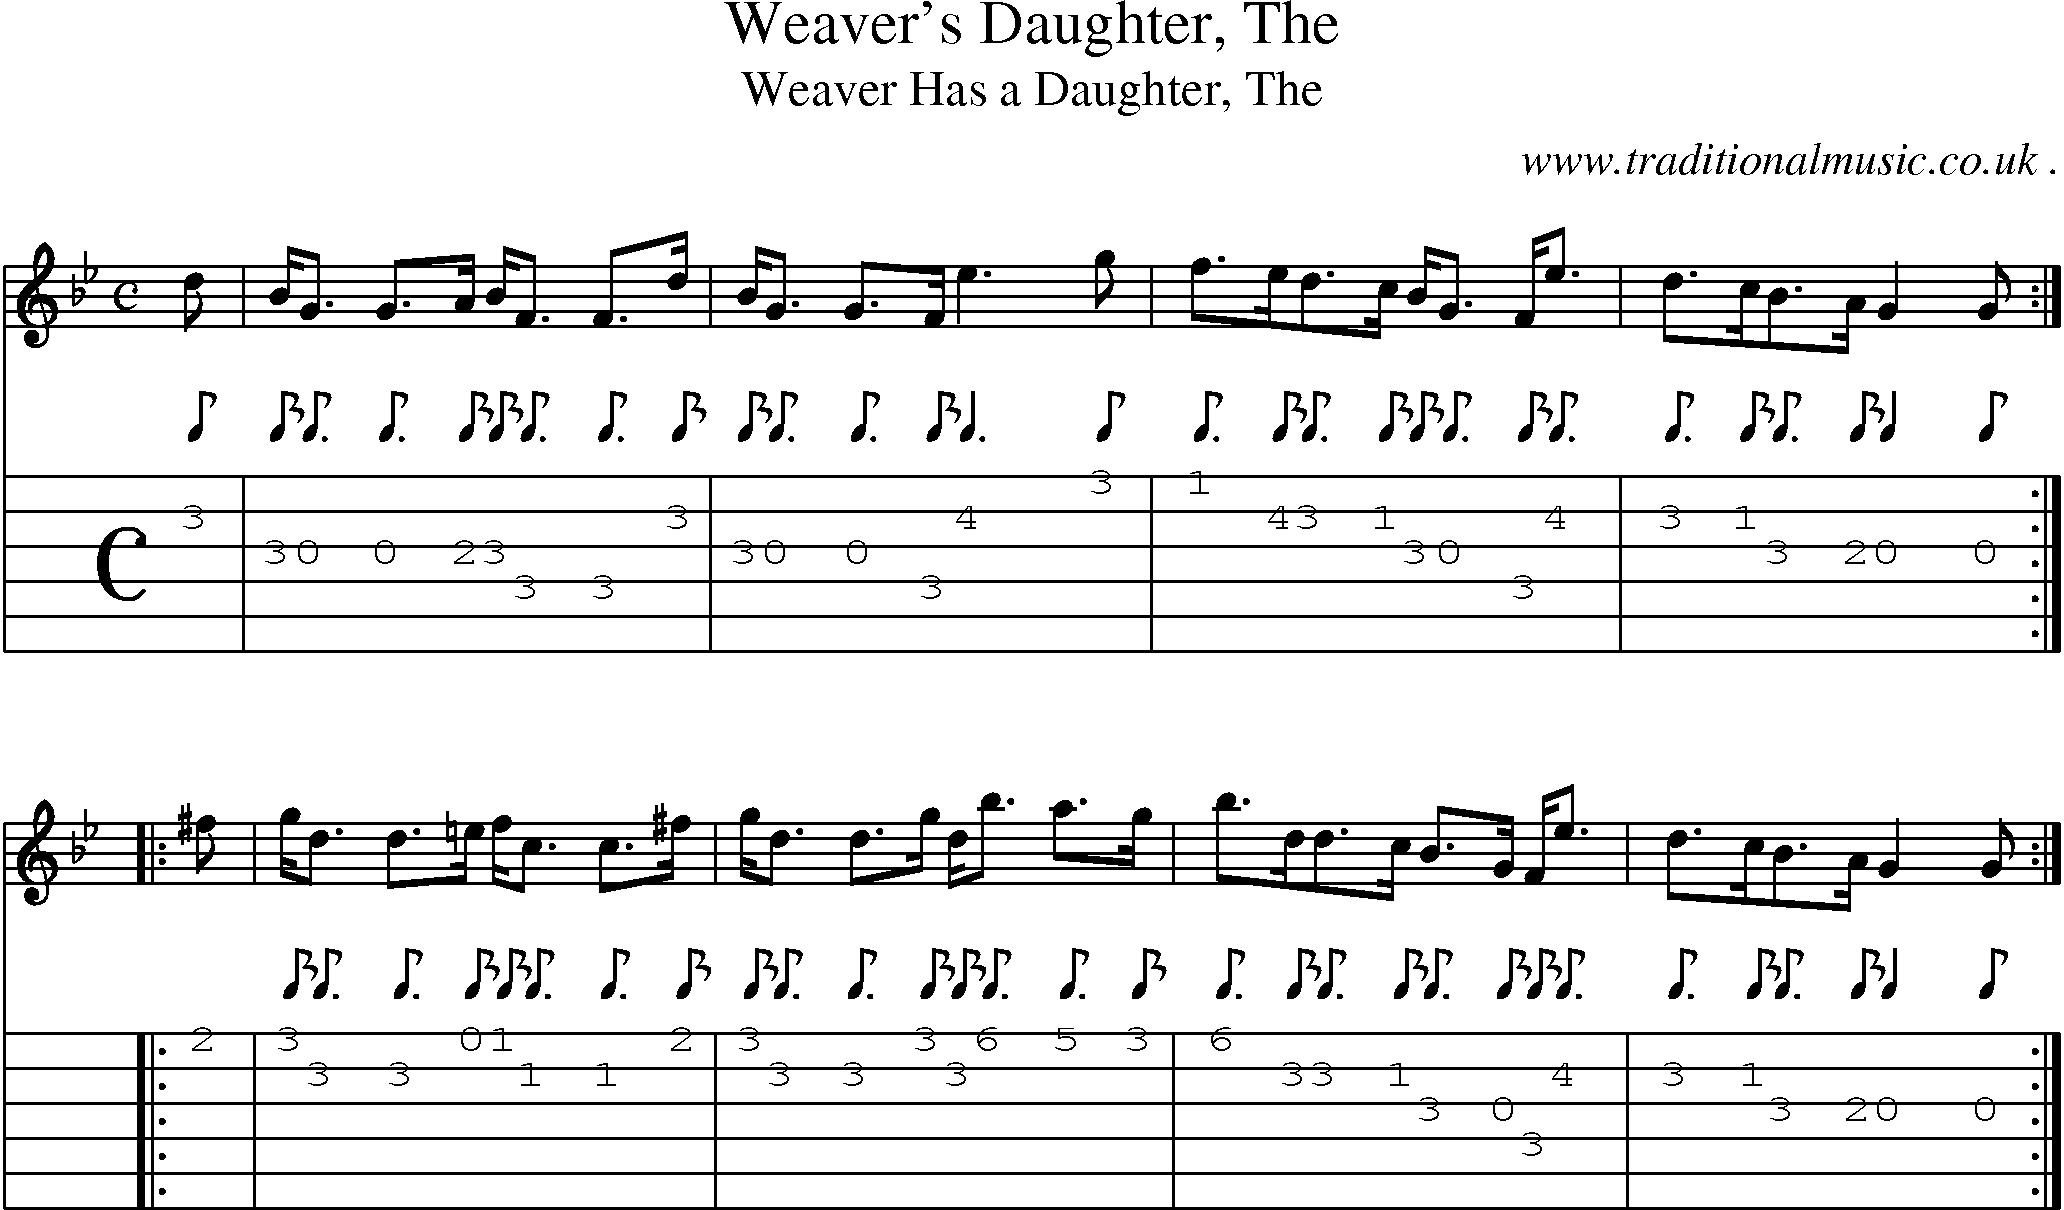 Sheet-music  score, Chords and Guitar Tabs for Weavers Daughter The